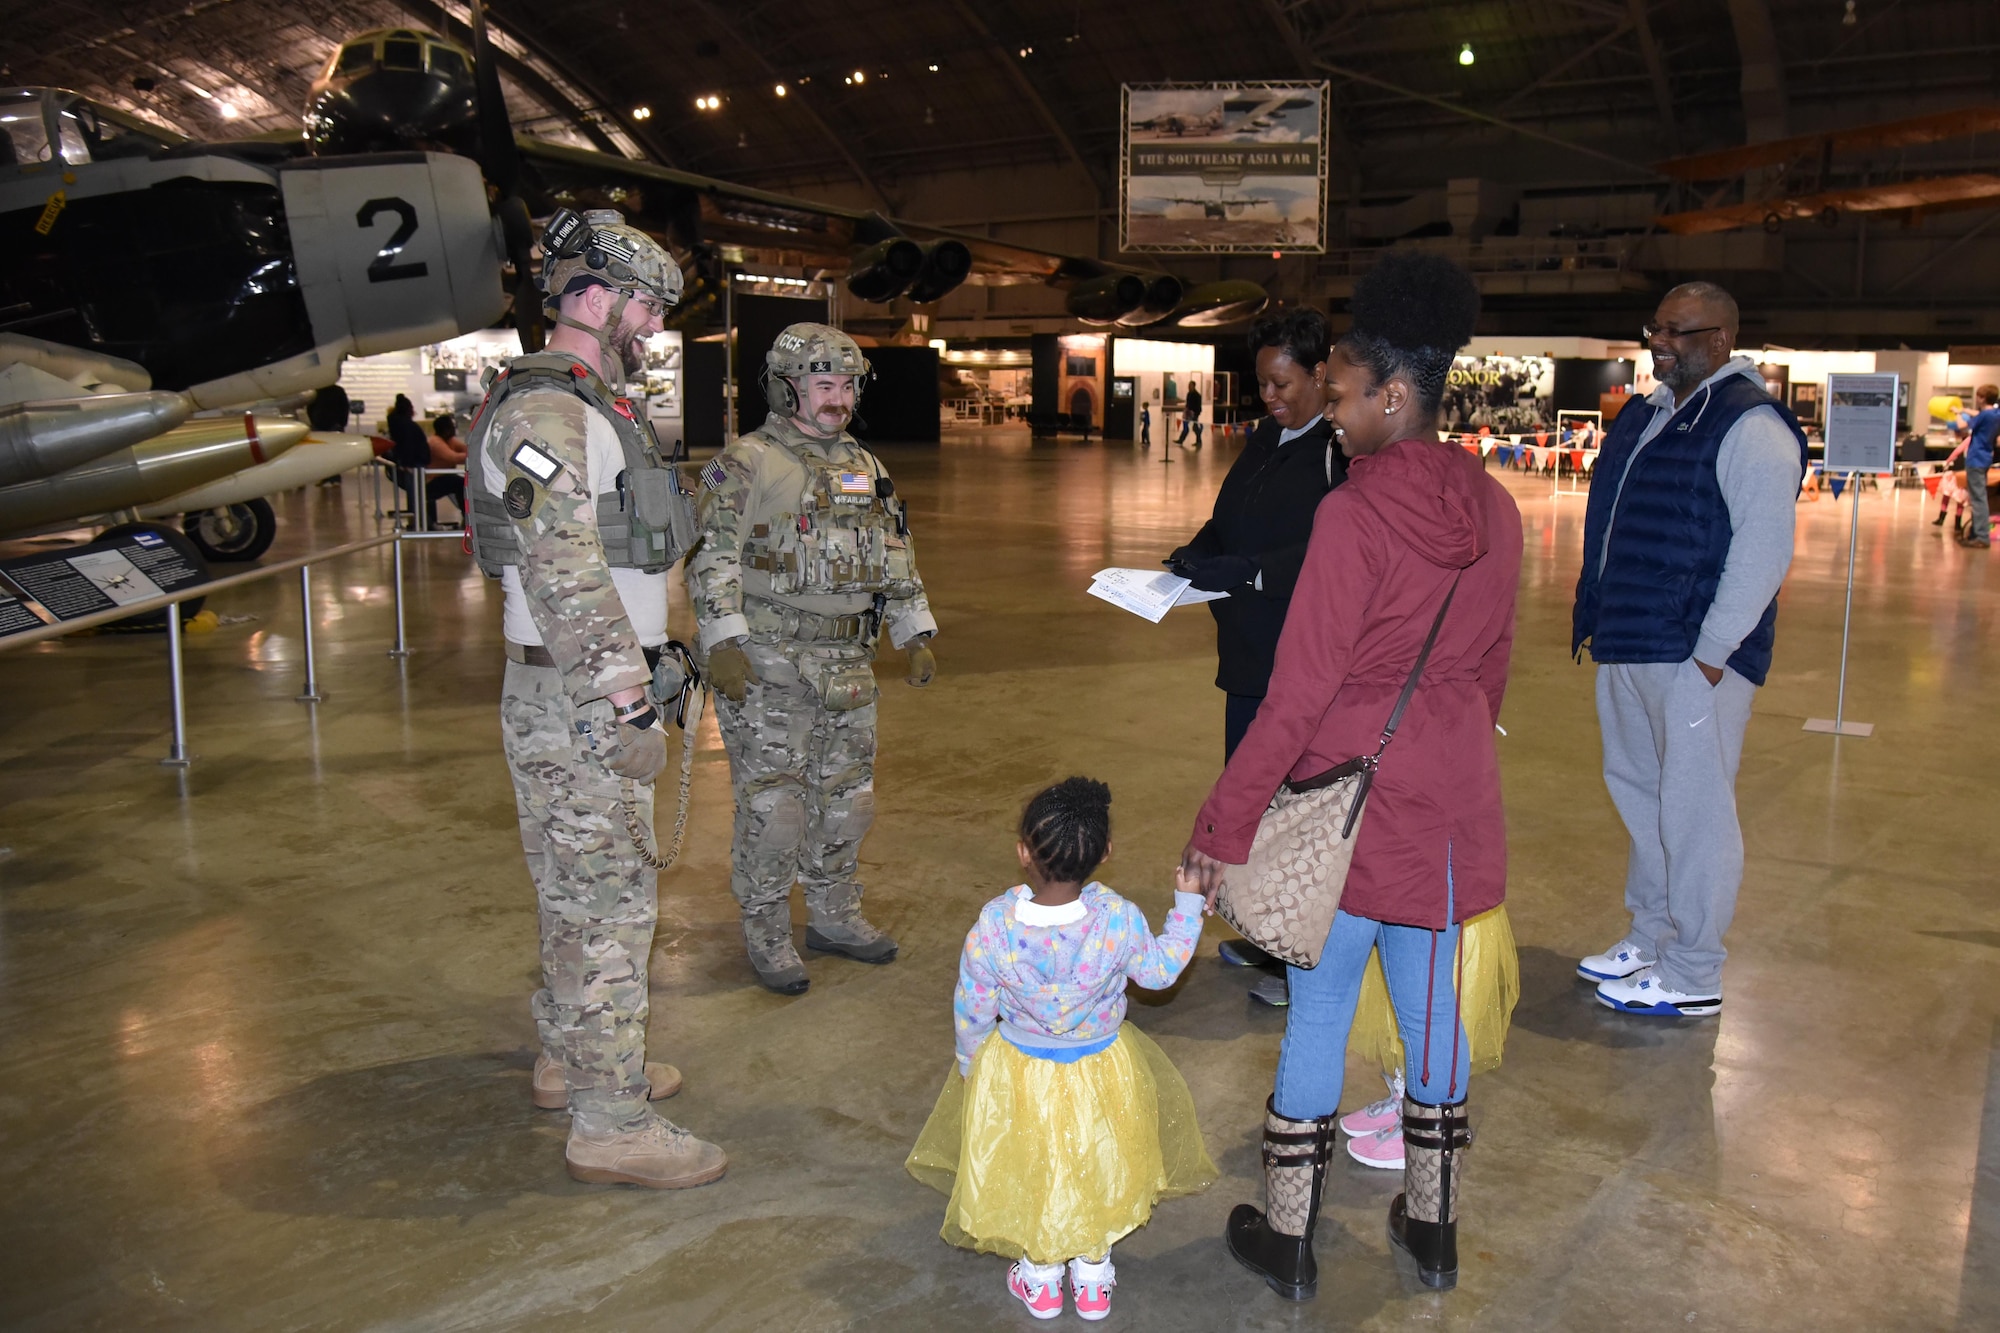 Museum visitors can enjoy dressing up in costumes and learning about aerospace principles through Halloween-themed activities during Family Day at the National Museum of the U.S. Air Force, Oct. 27. (U.S. Air Force photo/Ken LaRock)